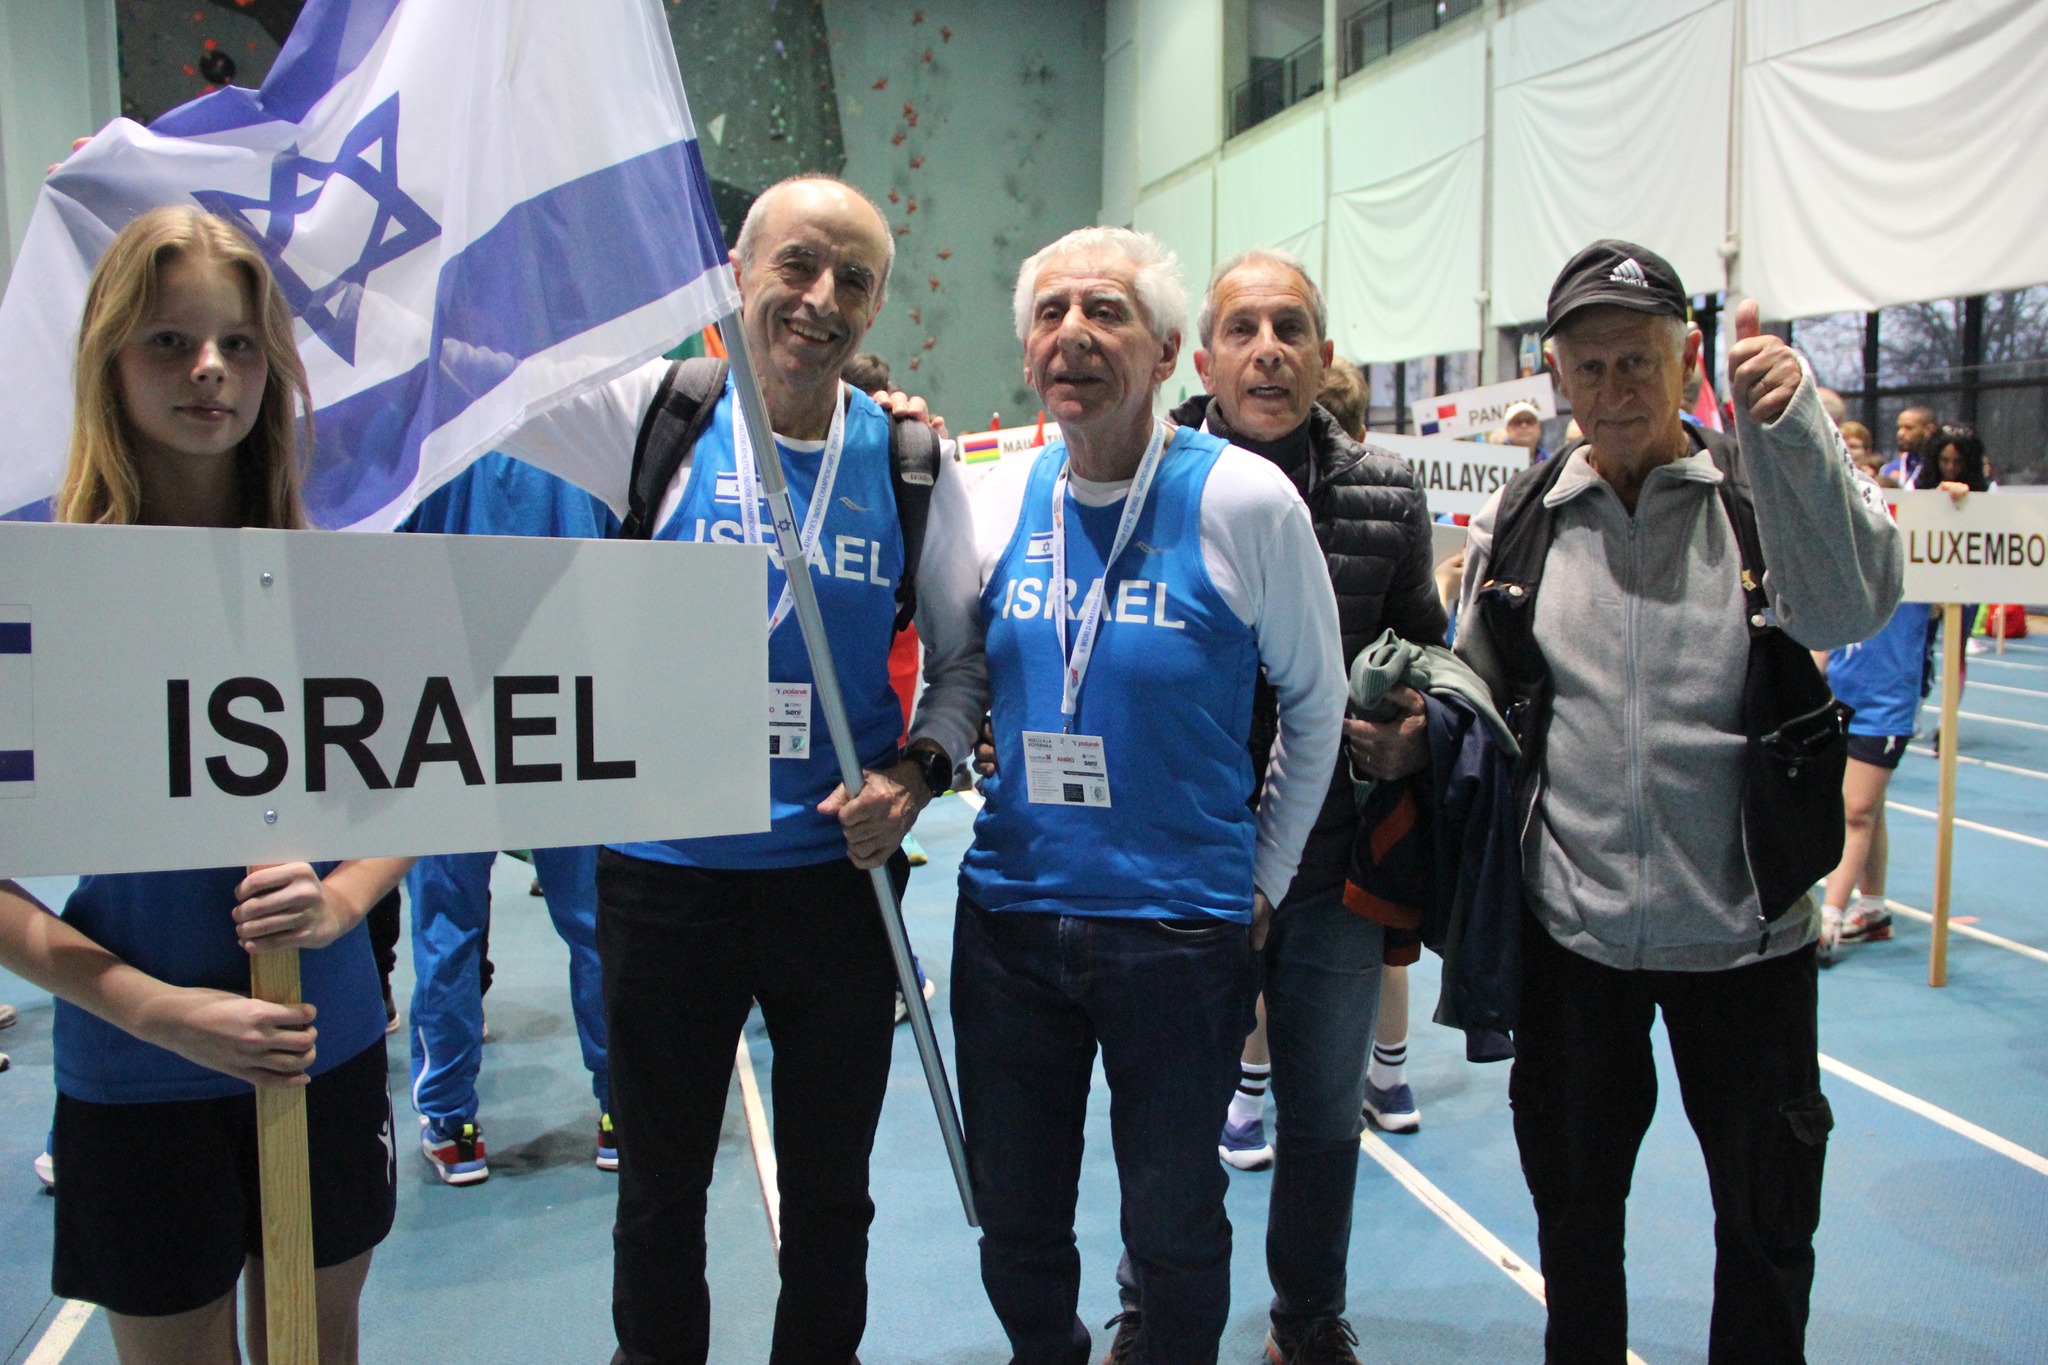 Team Israel ready for Opening Ceremony. Photo by Sandy Triolo.